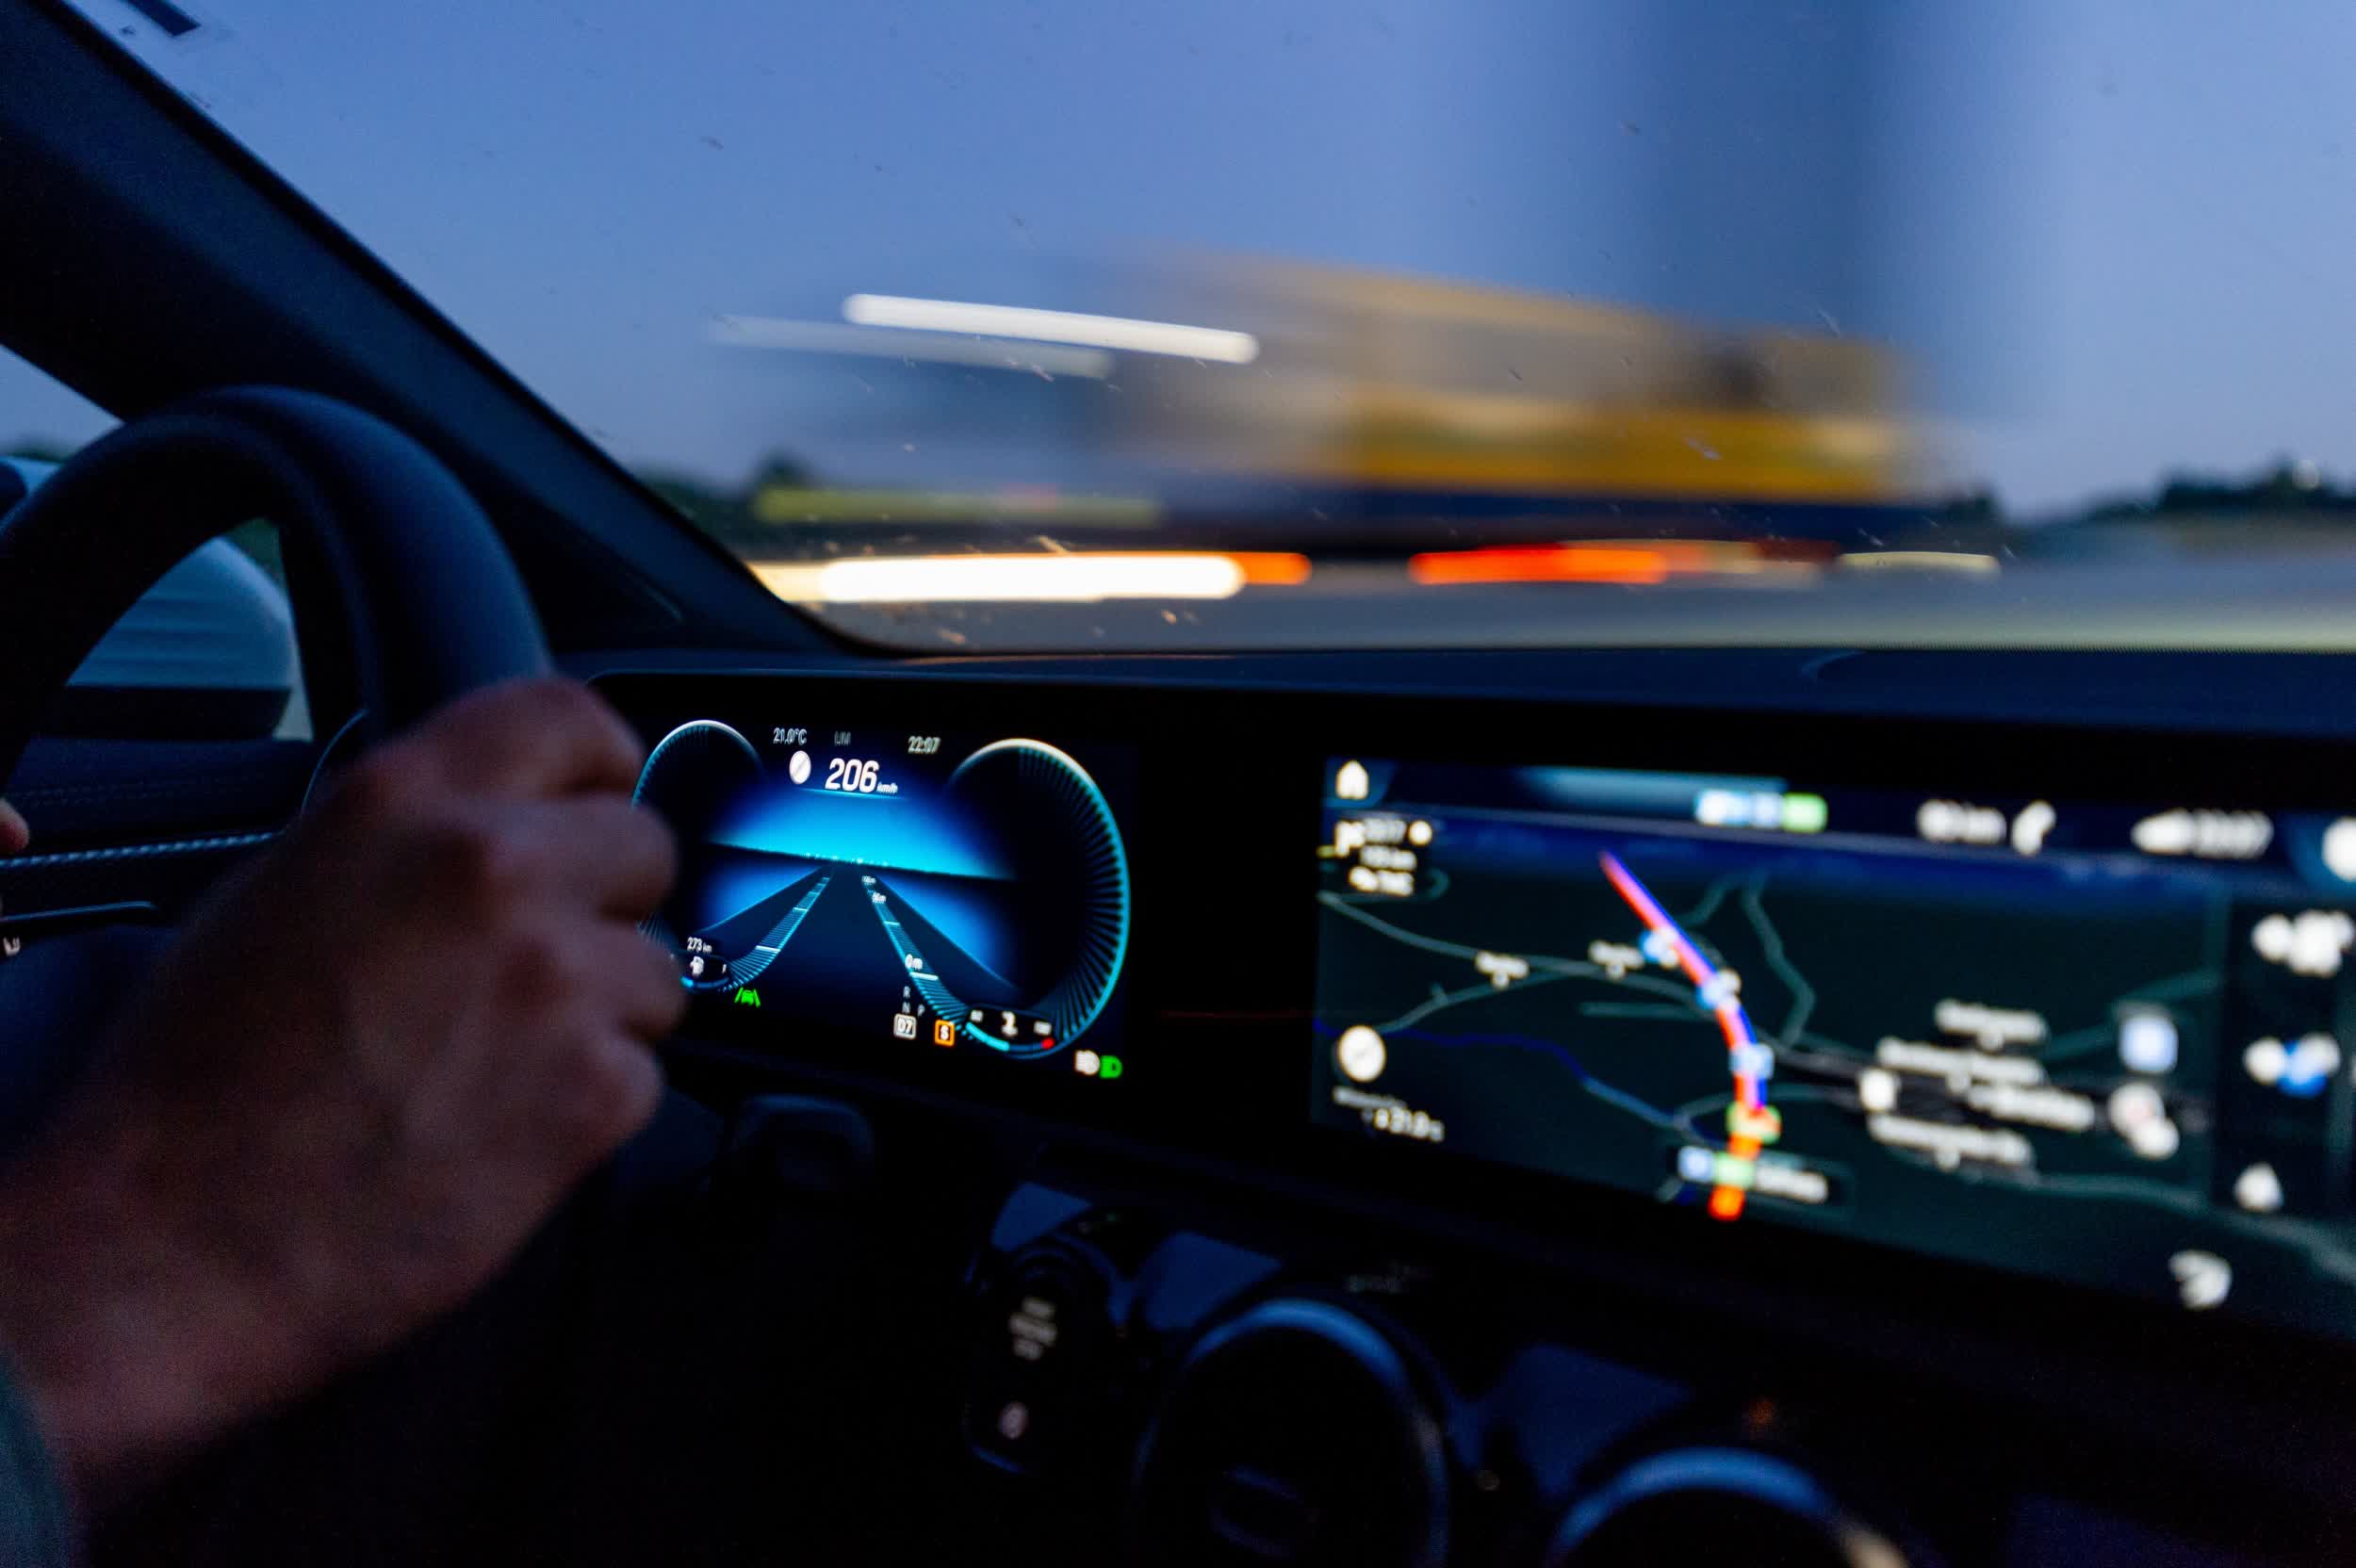 Auto safety test: physical buttons beat modern touchscreens